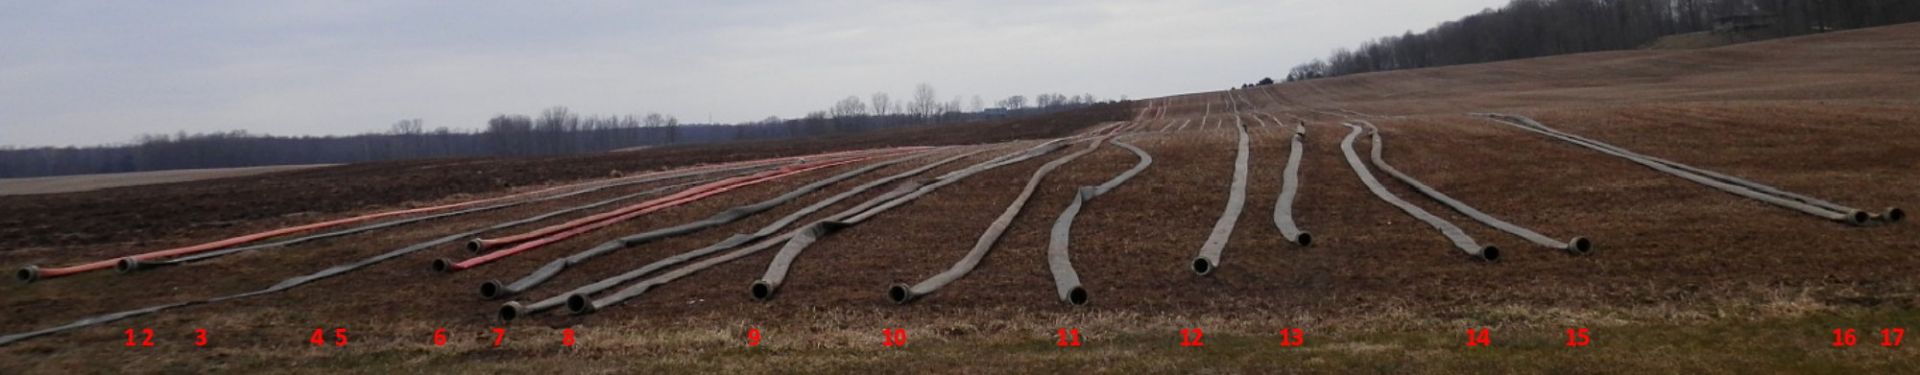 MANURE IRRIGATION HOSE-LAY HOSE, 1100 Ft. (Sold by the foot x 1100)